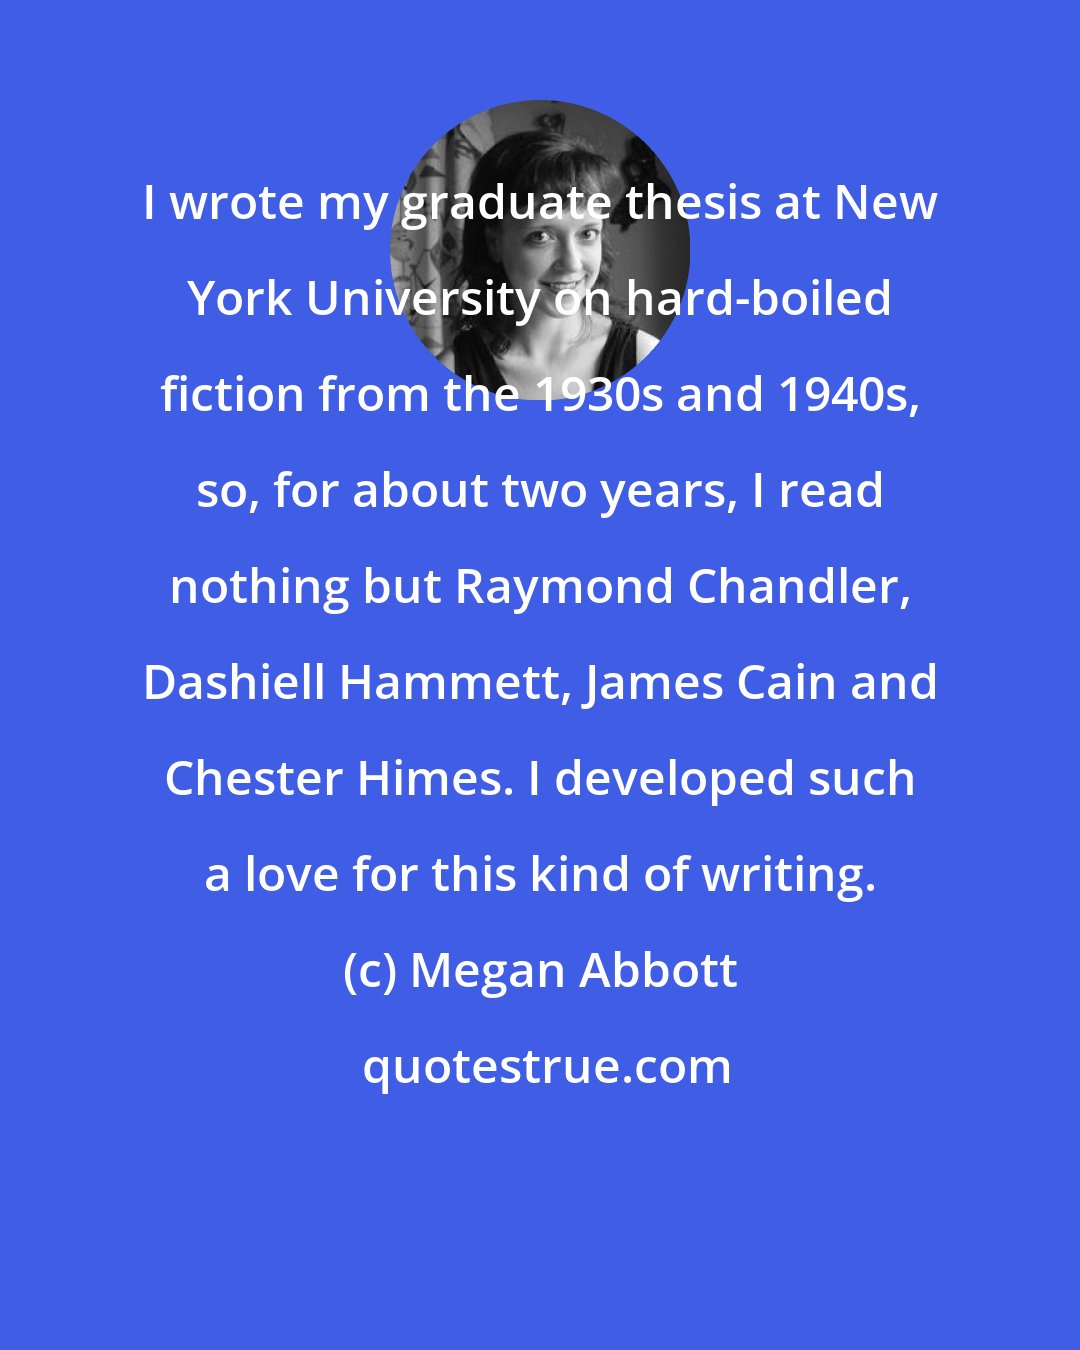 Megan Abbott: I wrote my graduate thesis at New York University on hard-boiled fiction from the 1930s and 1940s, so, for about two years, I read nothing but Raymond Chandler, Dashiell Hammett, James Cain and Chester Himes. I developed such a love for this kind of writing.